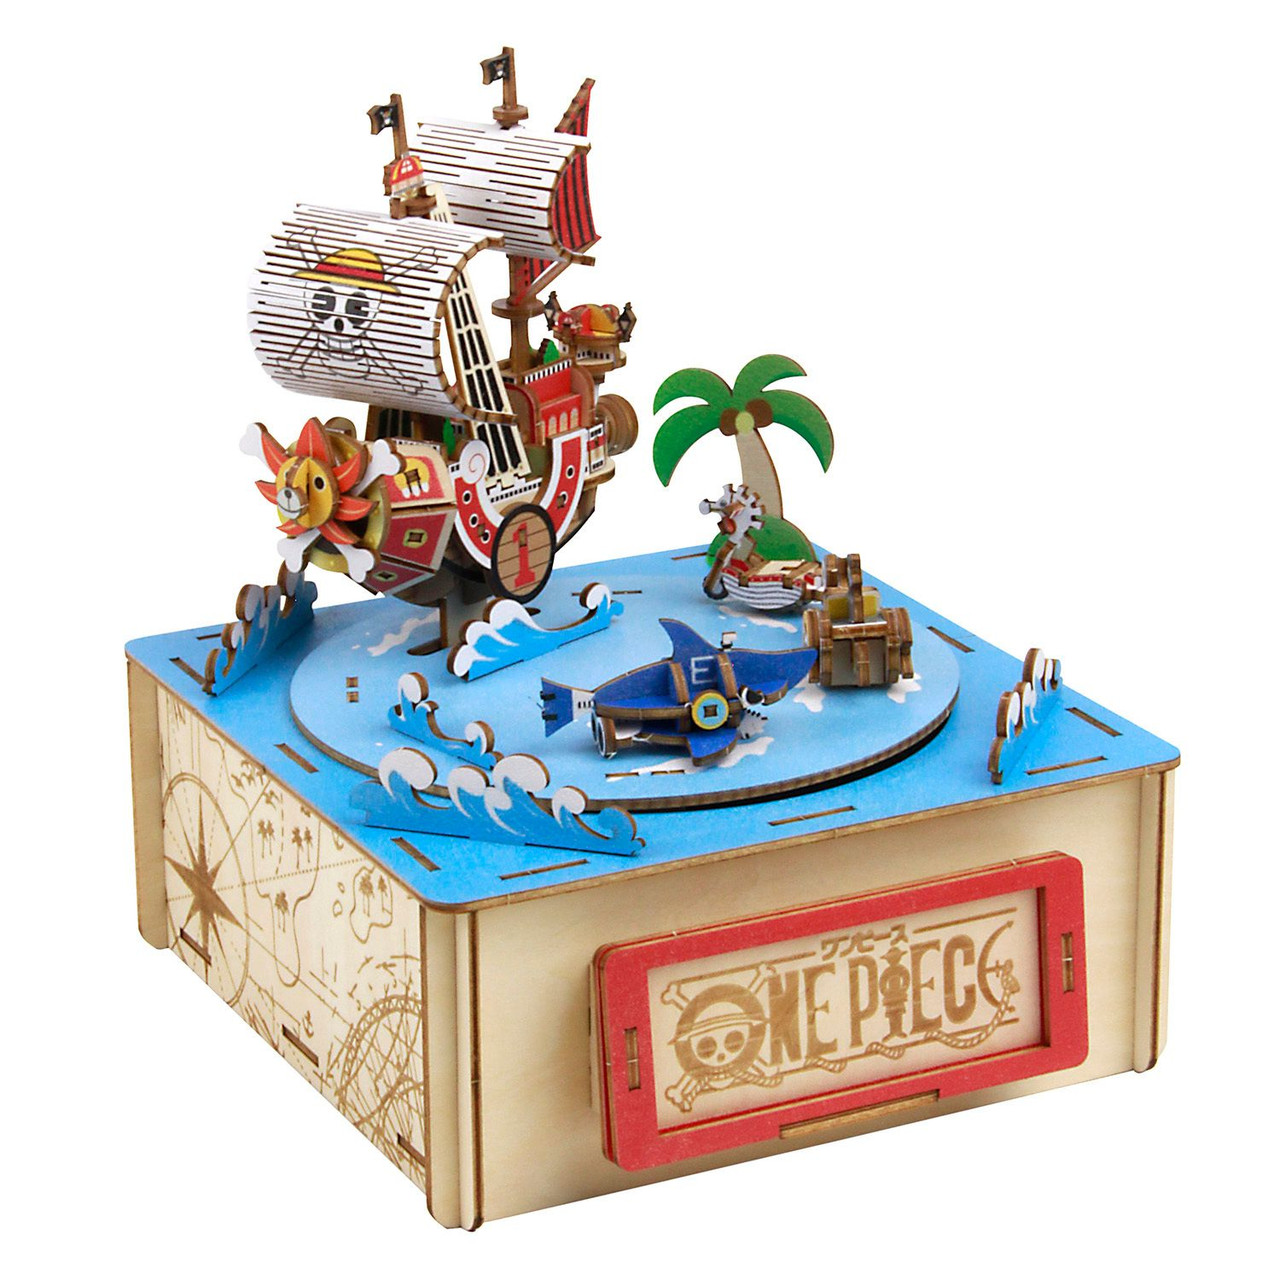 Azone Wooden 3d Puzzle Wooden Art Ki Gu Mi One Piece Thousand Sunny Free Next Day Delivery Great